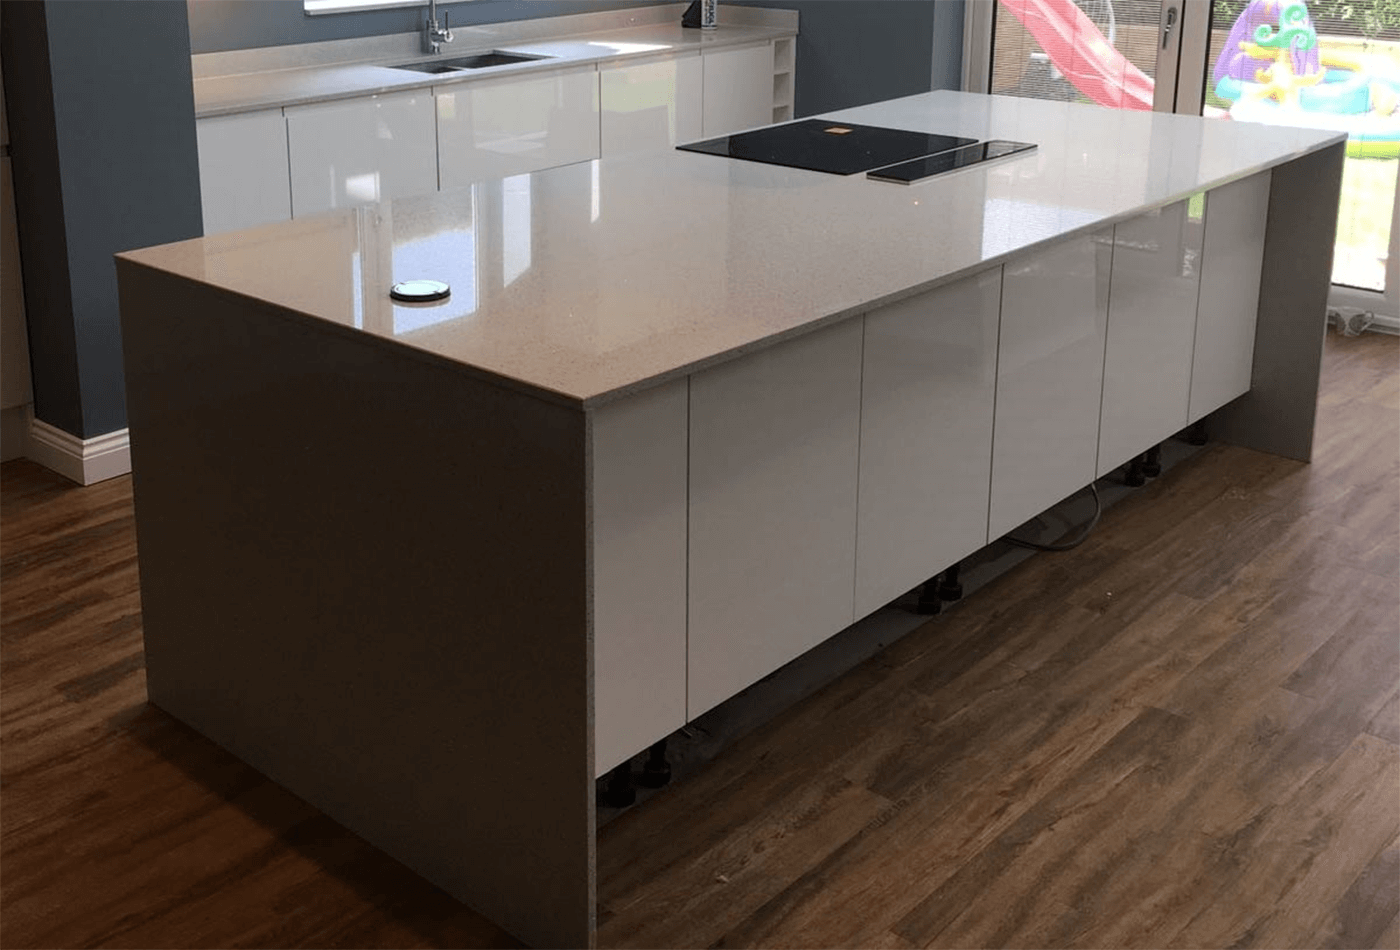 Care and Maintenance for Your Kitchen Worktop